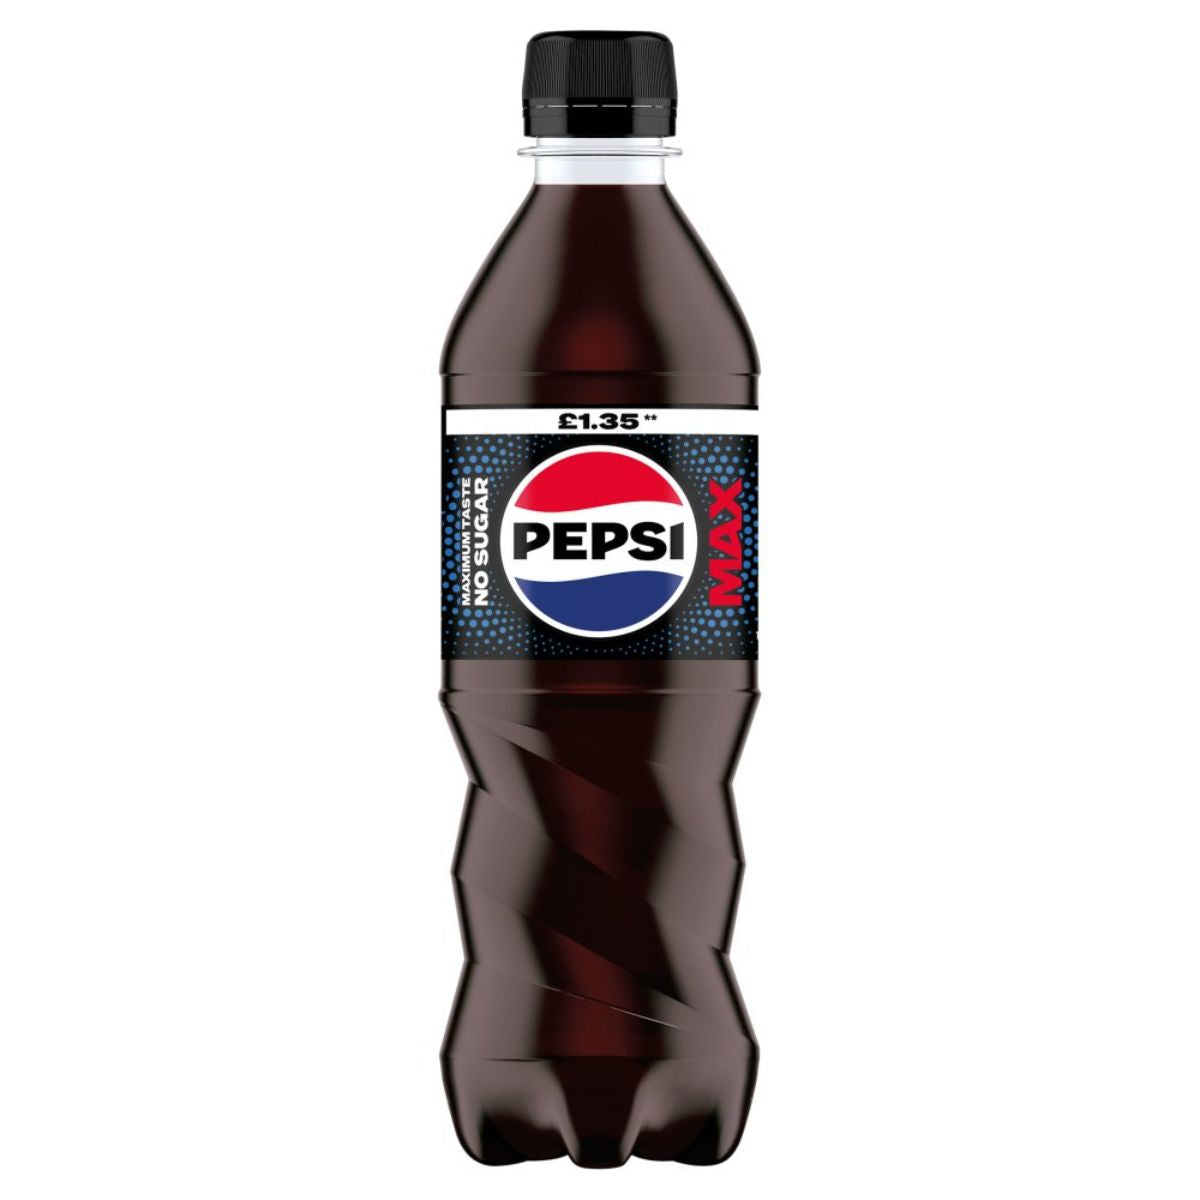 A bottle of Pepsi - Max Original - 500ml on a white background.